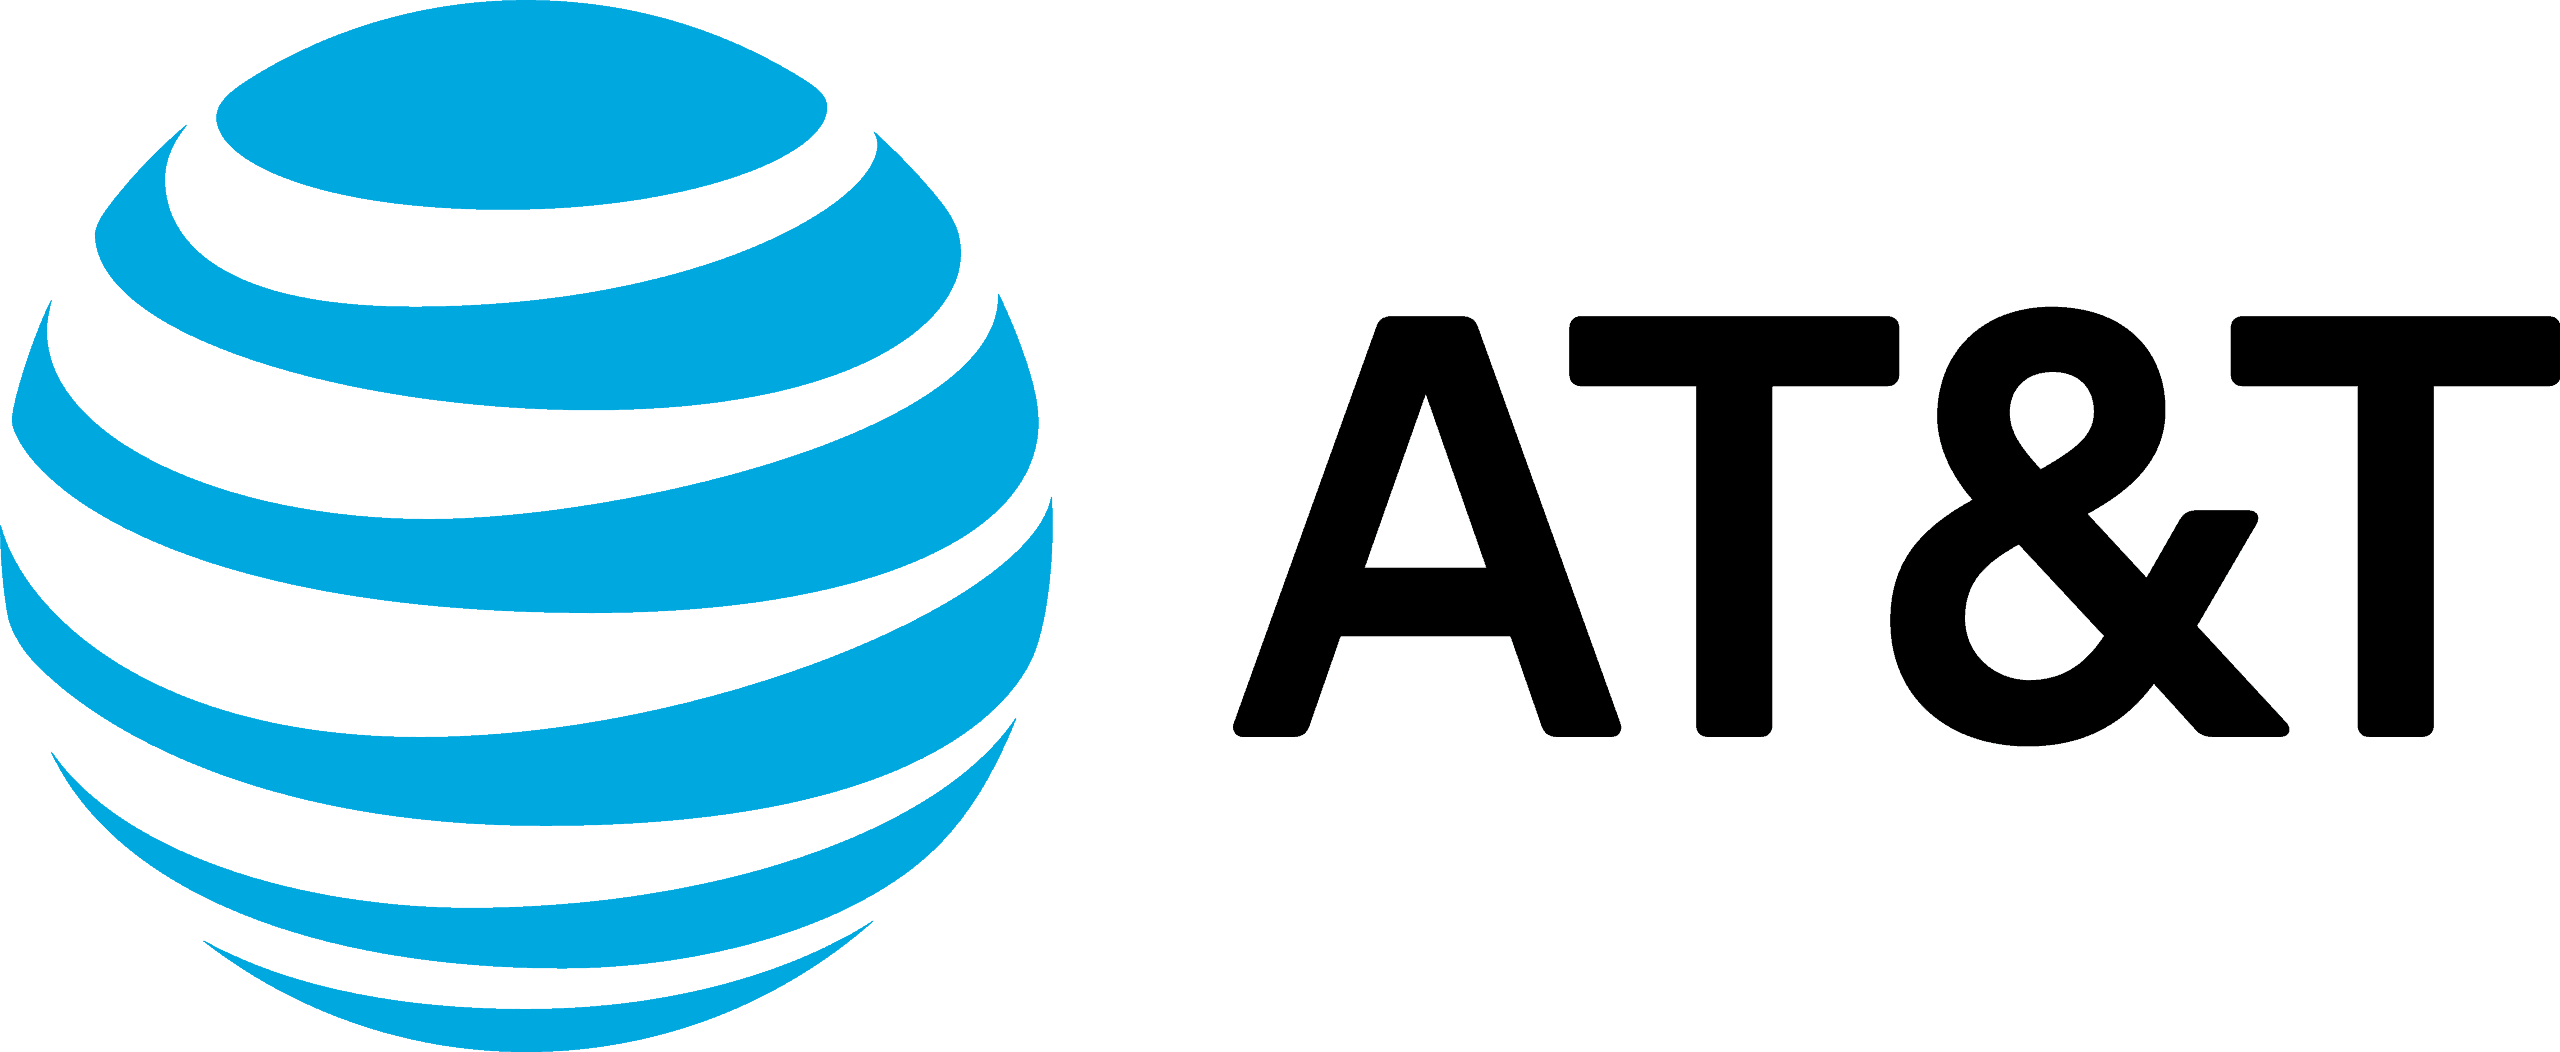 AT&T student discount code